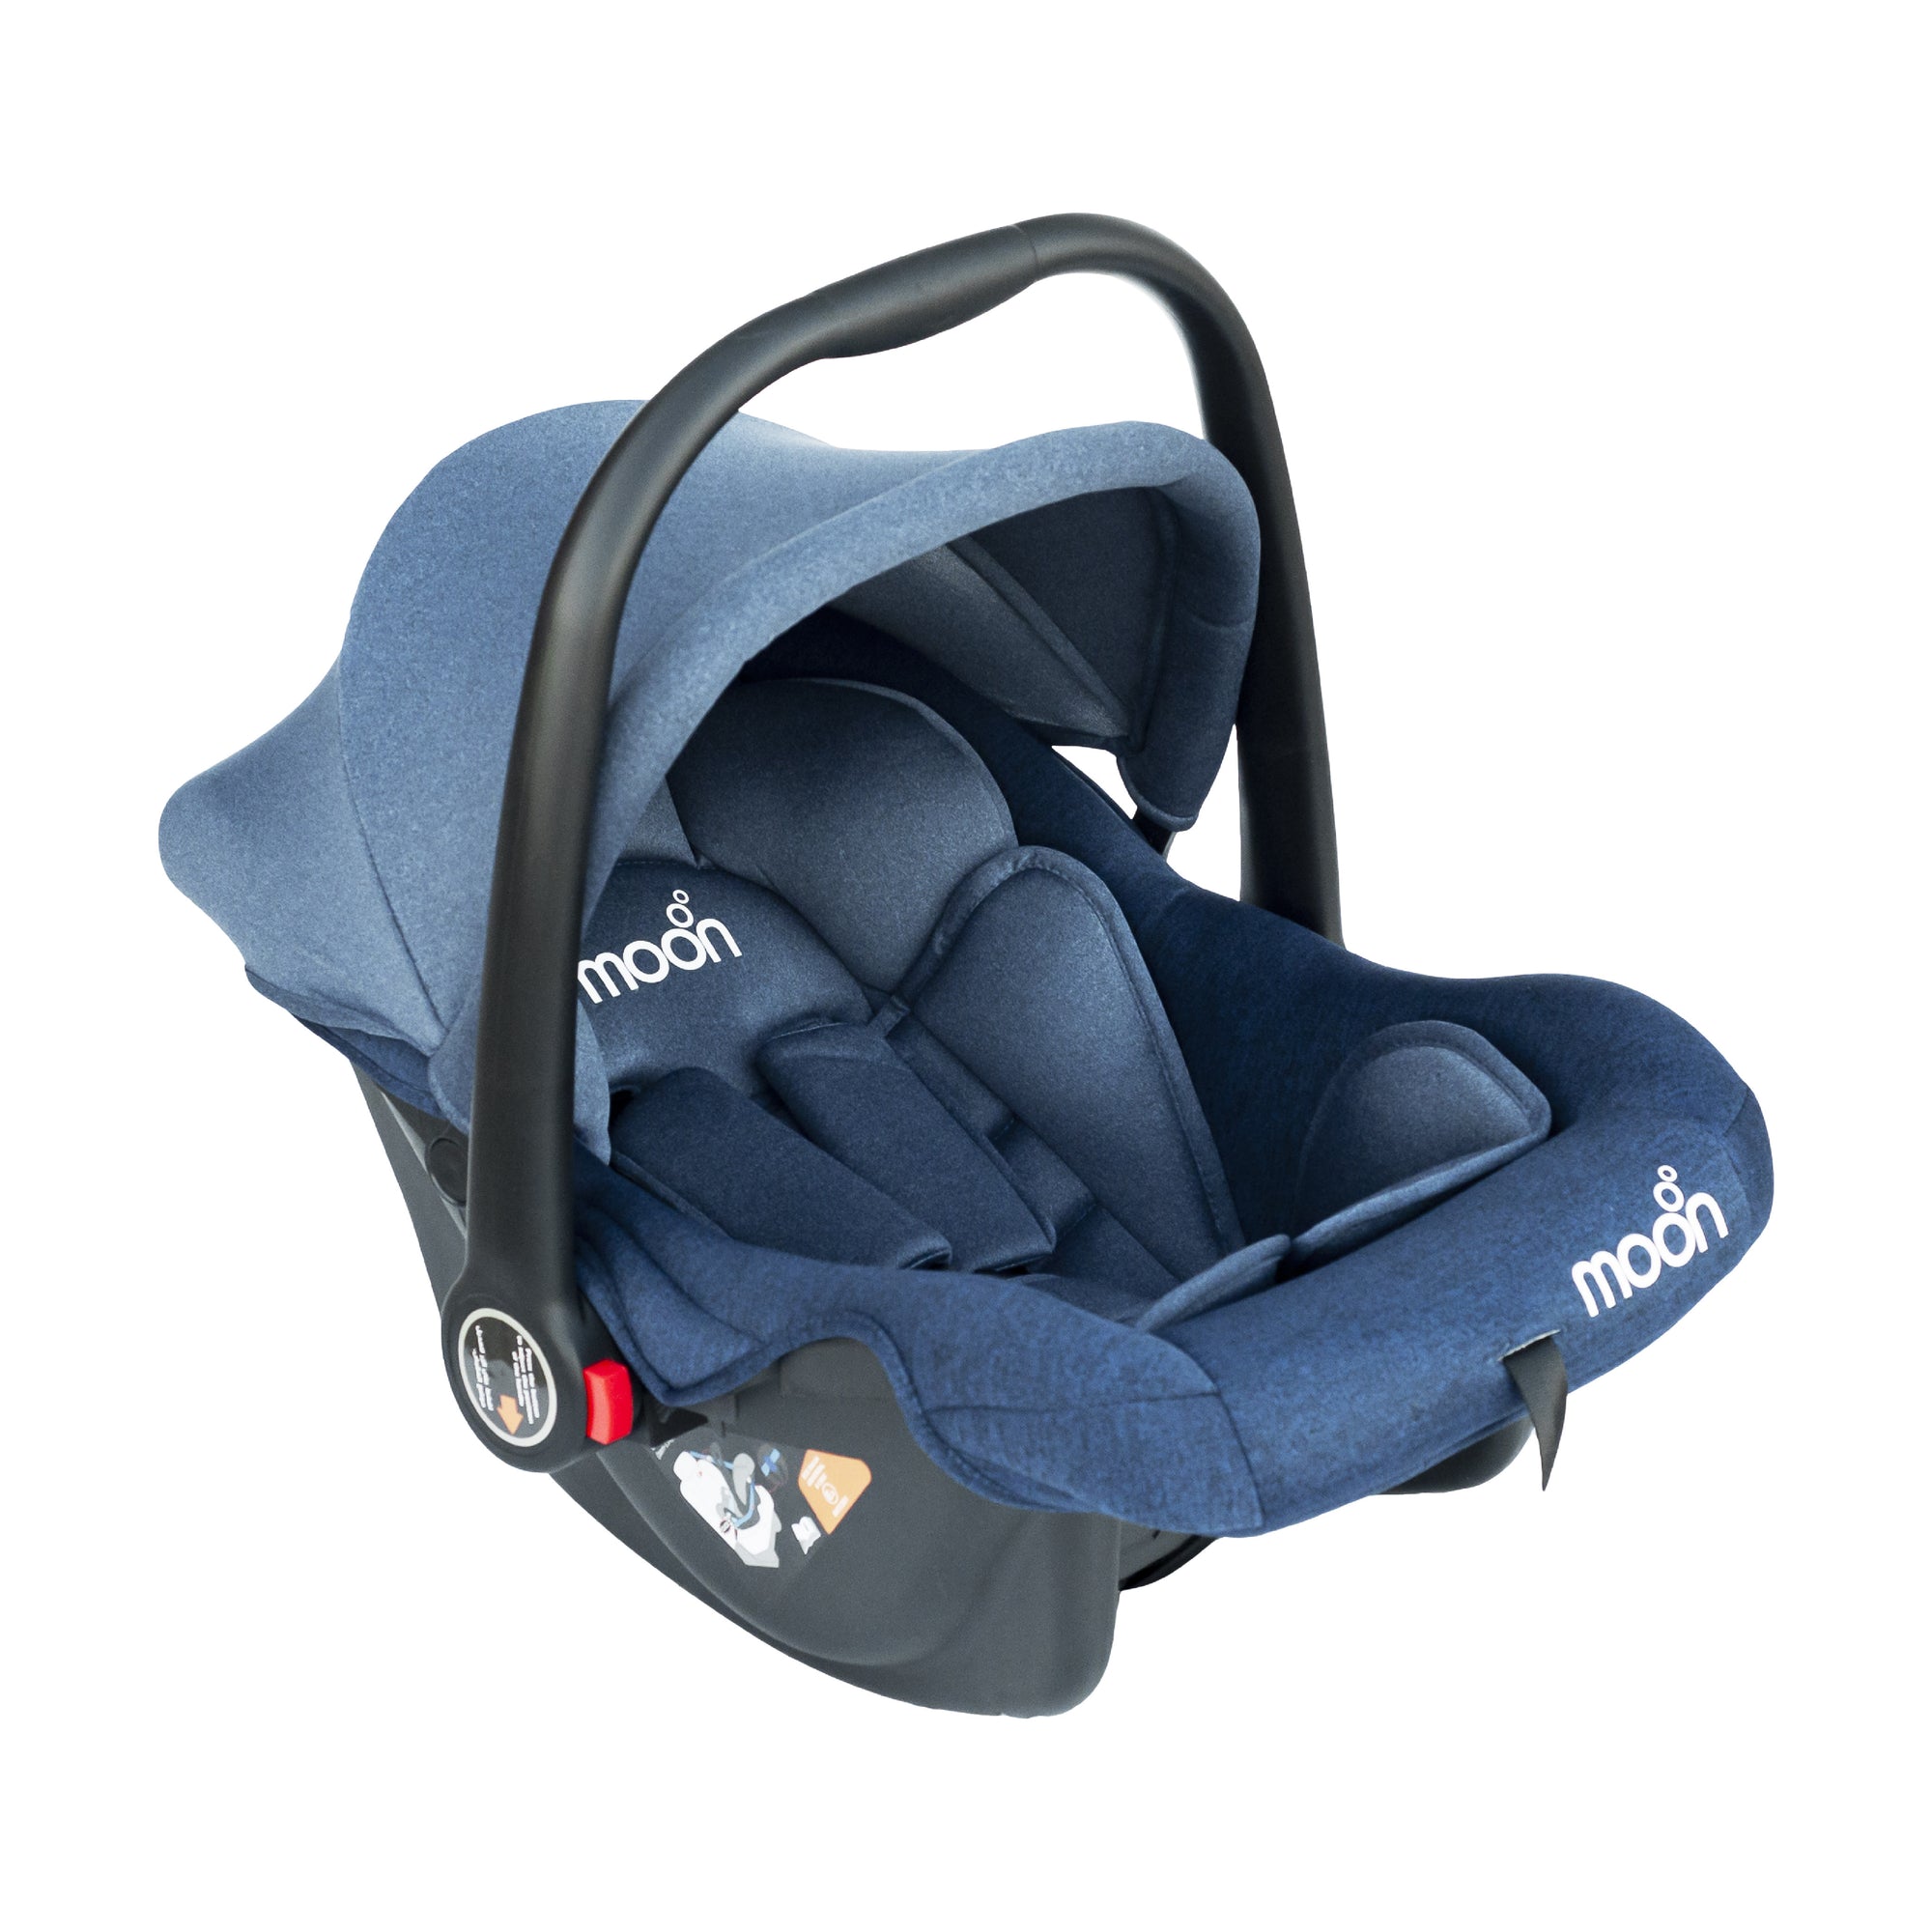 Moon Bibo Infant Carrier Birth to 9 Months